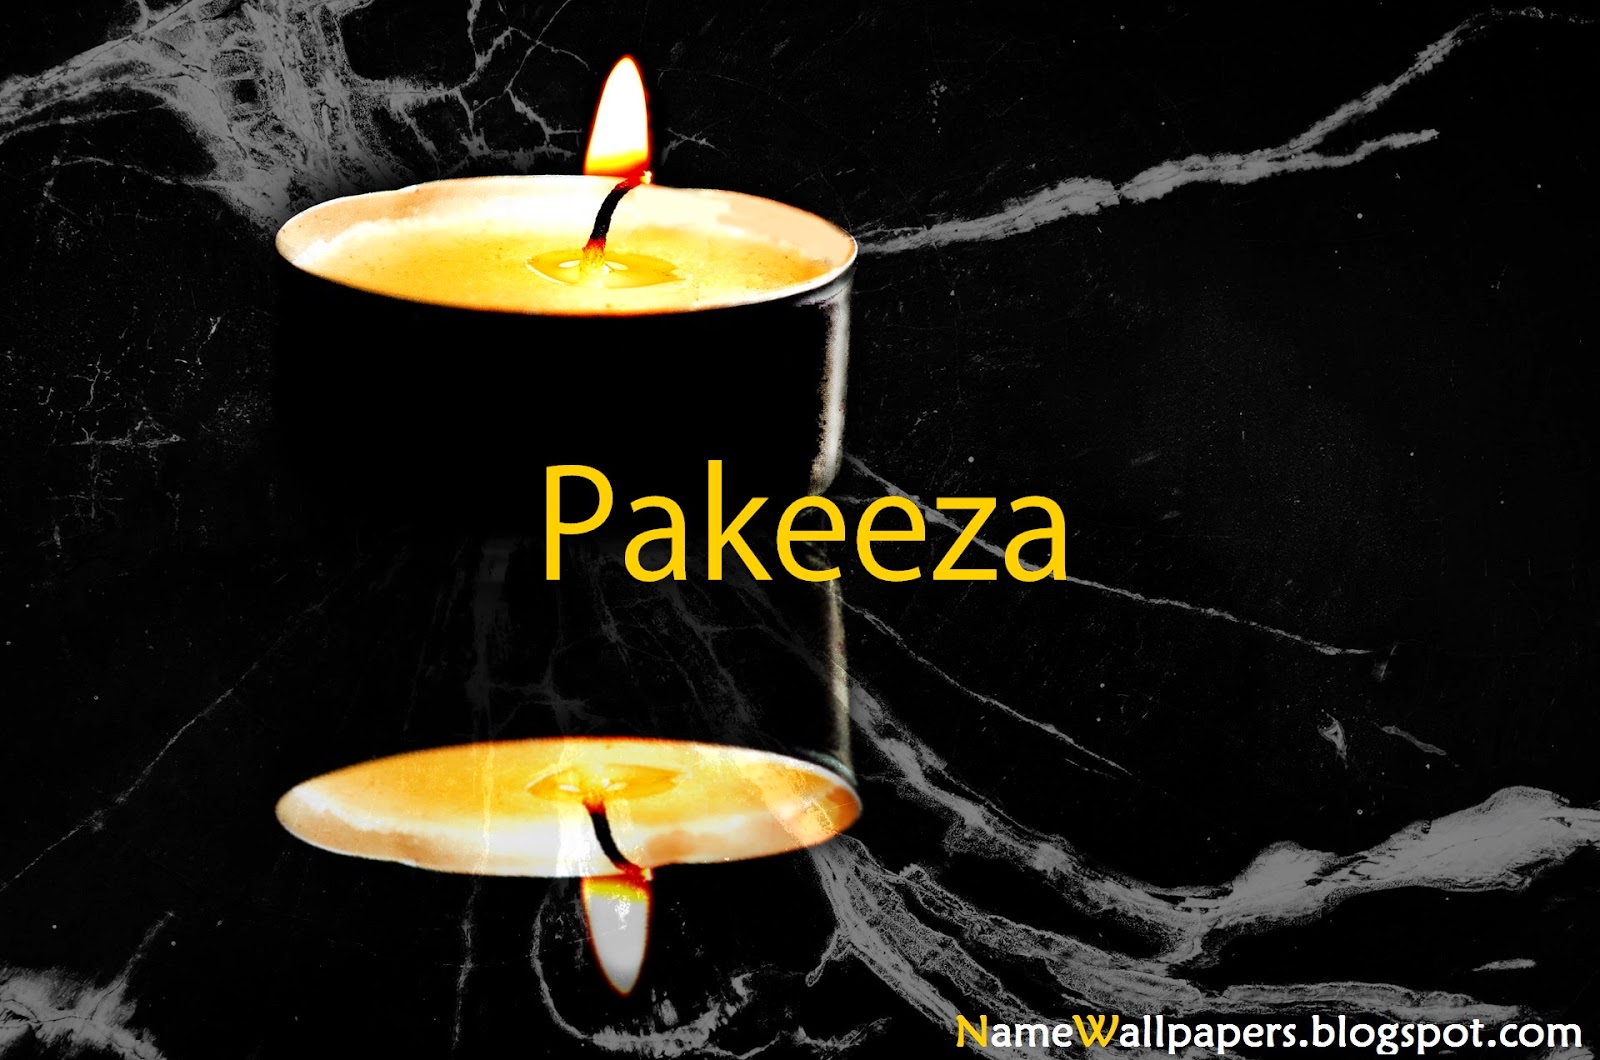 Pakeeza Name Wallpapers Pakeeza Name Wallpaper Urdu Name Meaning Name Images Logo Signature Feature so you can easily copycool text. name wallpaper urdu name meaning name images logo signature